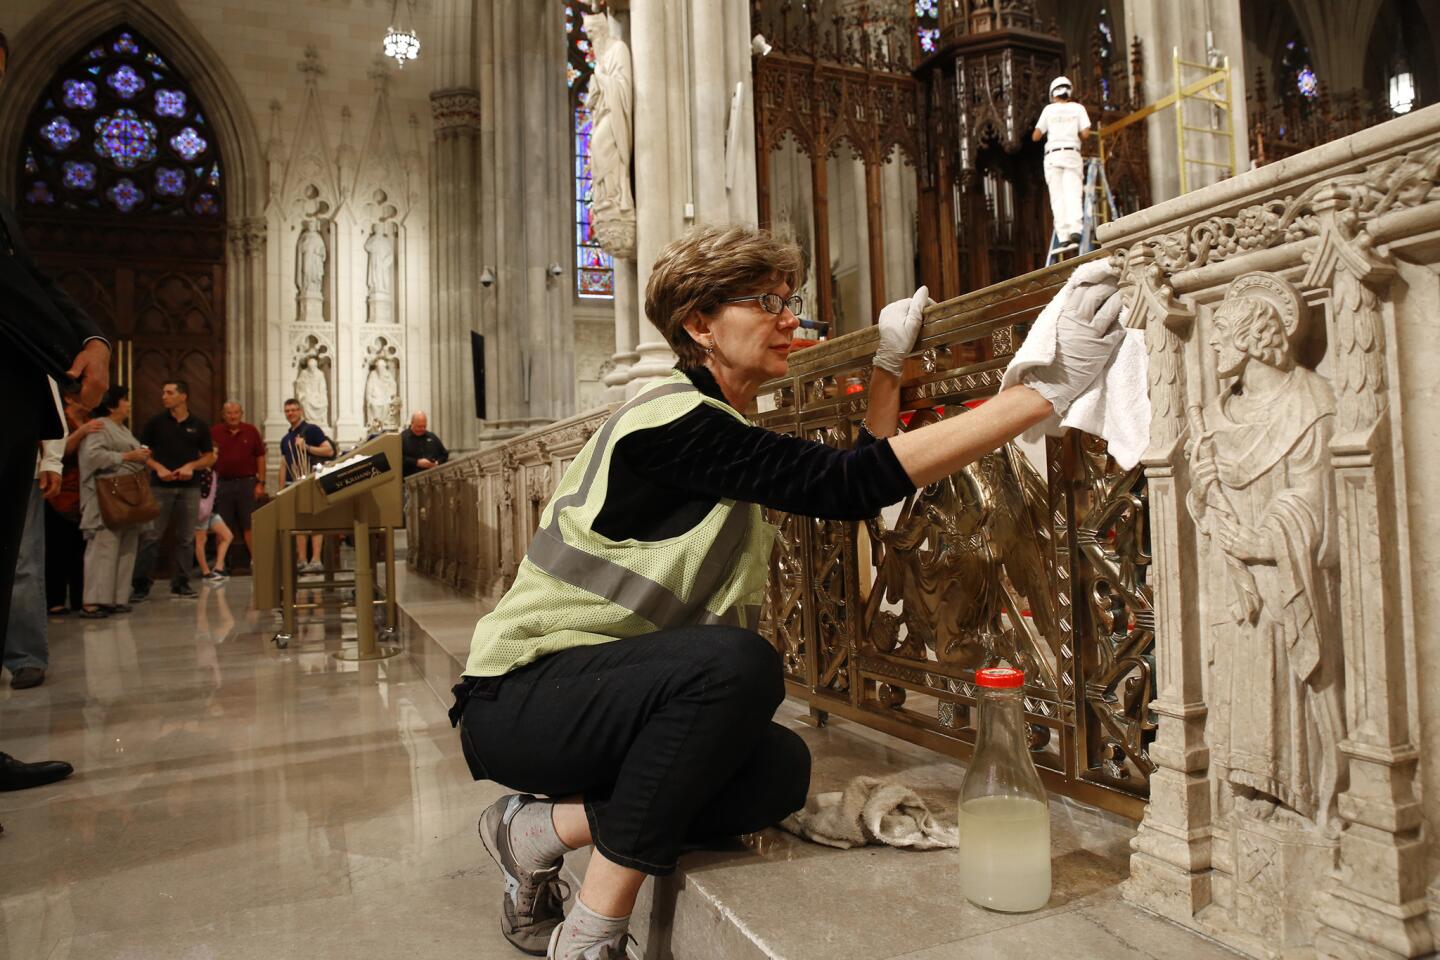 Lucia Popian polishes the gold and bronze elements of St. Patricks Cathedral in preparation for Pope Francis' visit. Popian was hired to work on the cathedral three years ago, before the pope's visit was announced. "We love to have him here," says Popian.